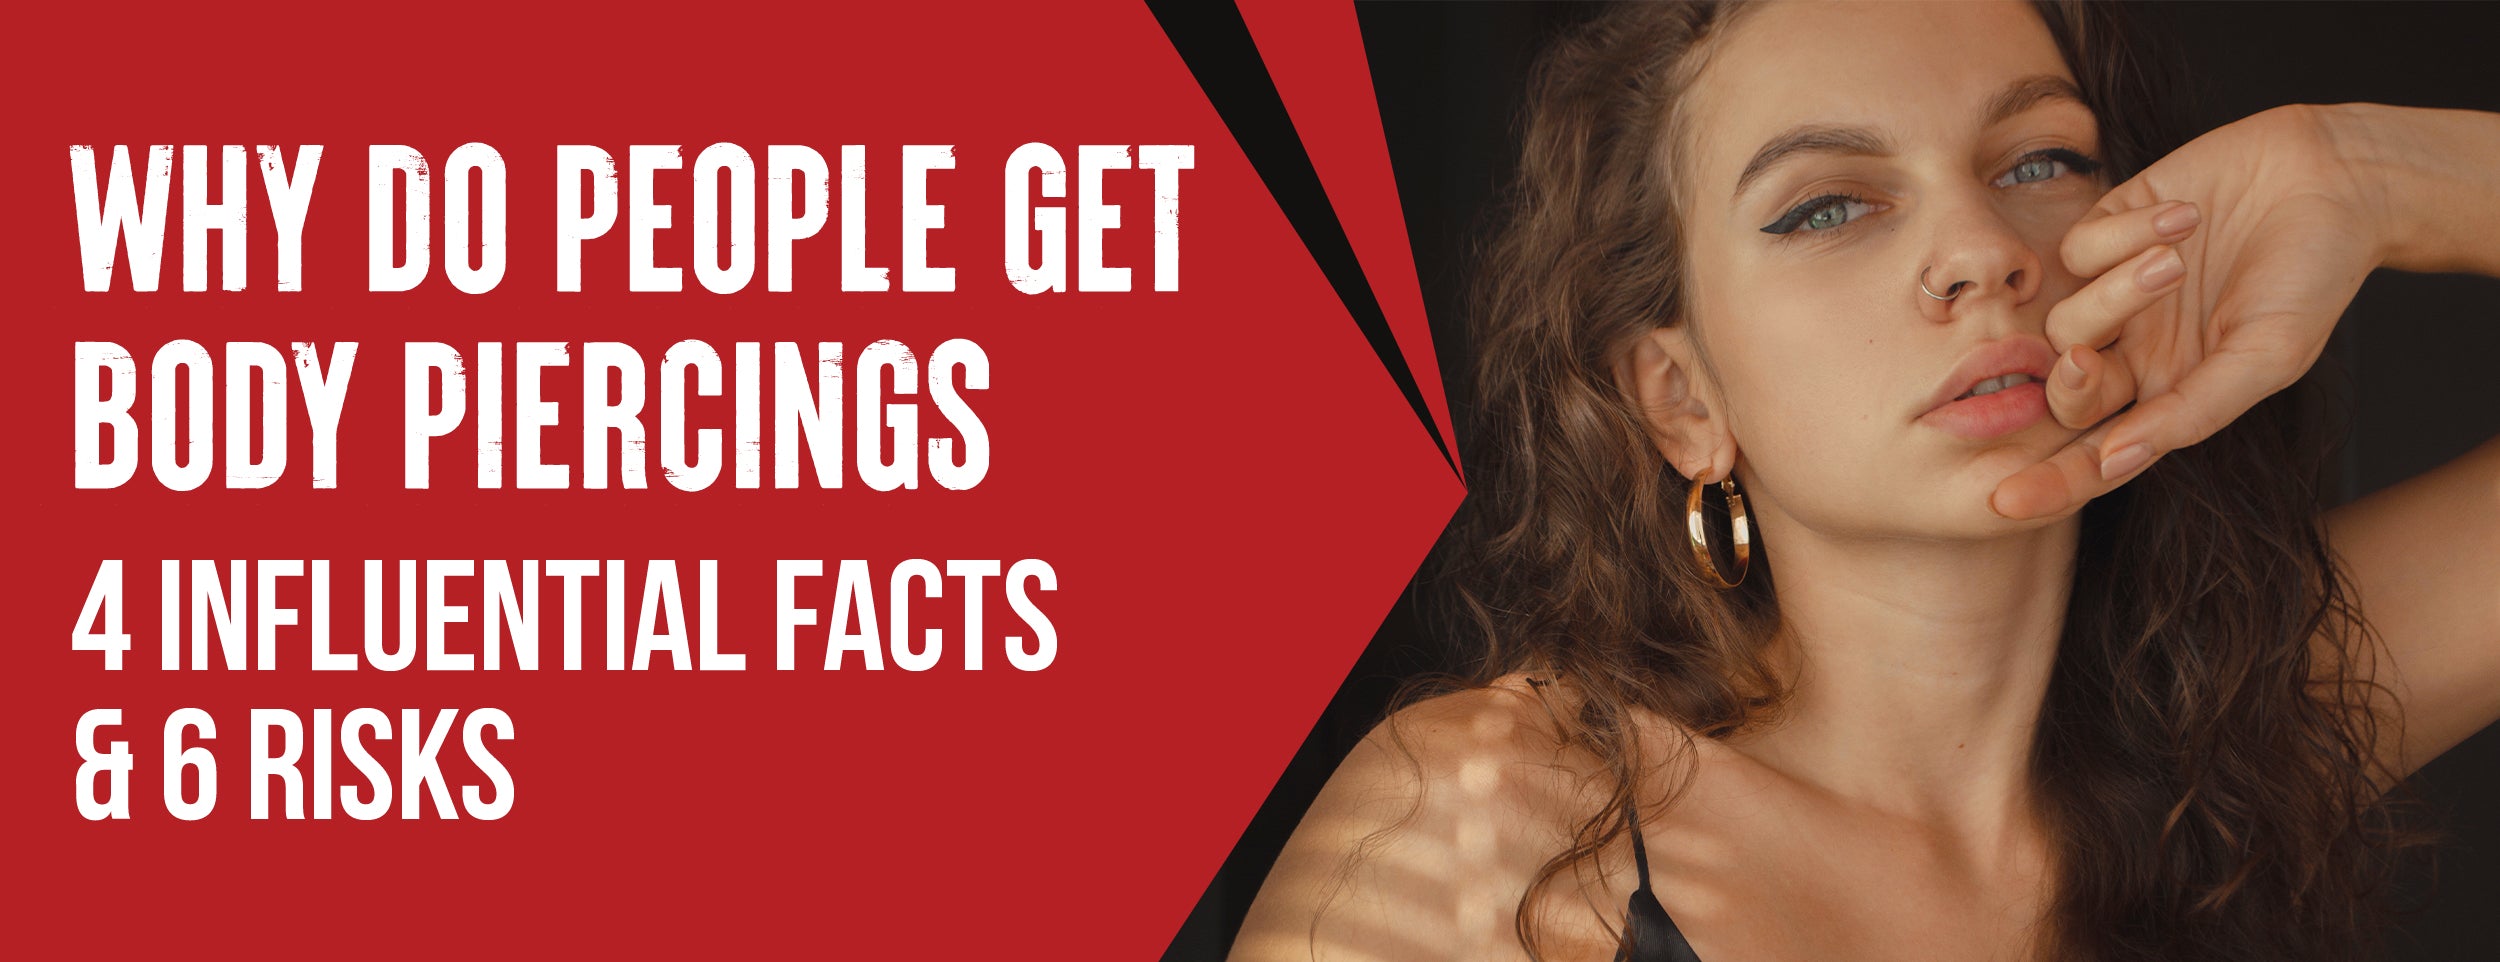 Factors That Influence People to Get Body Piercings